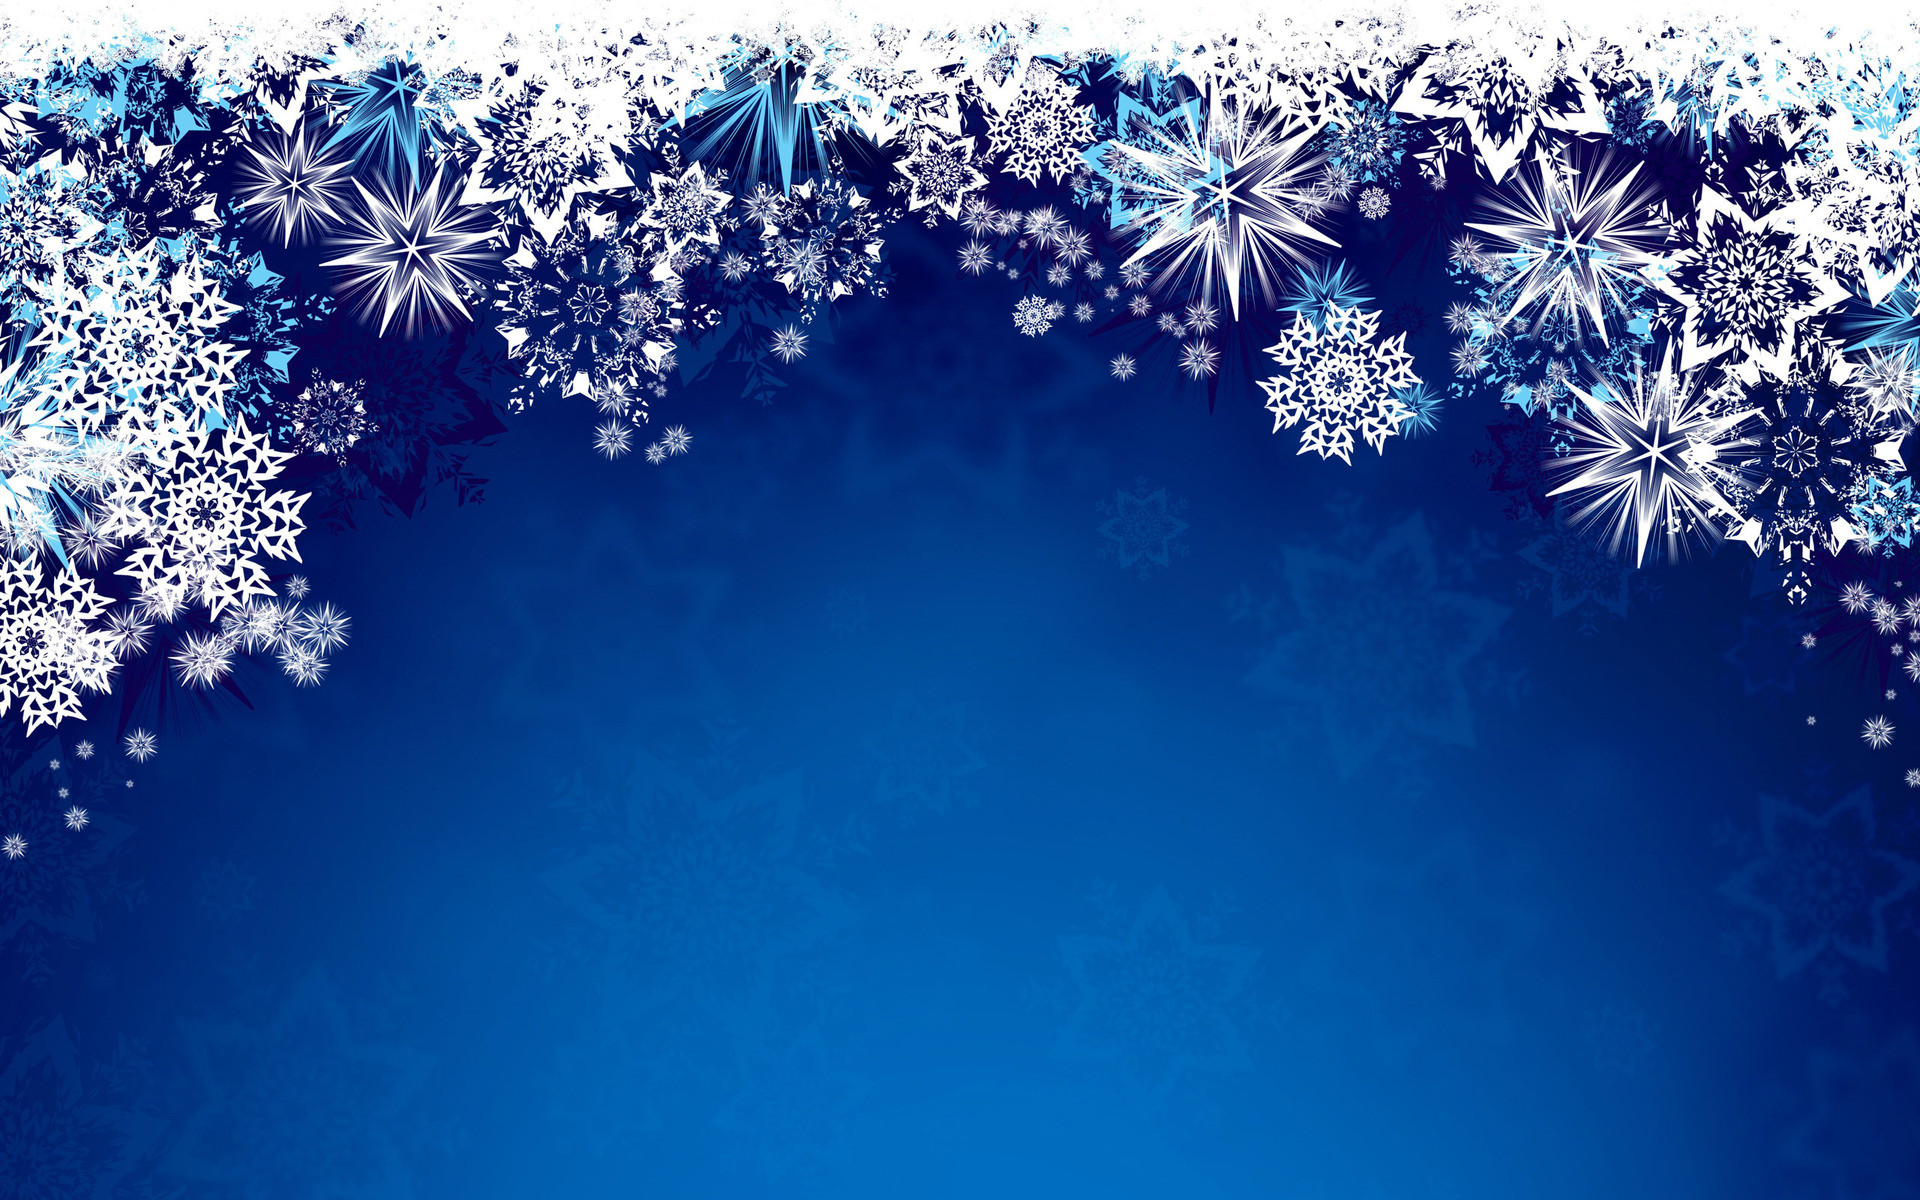 1920x1200 pictures photos snowflake wallpaper -  http://69hdwallpapers.com/pictures-photos-snowflake-wallpaper/ | Free HD  Wallpapers | Pinterest